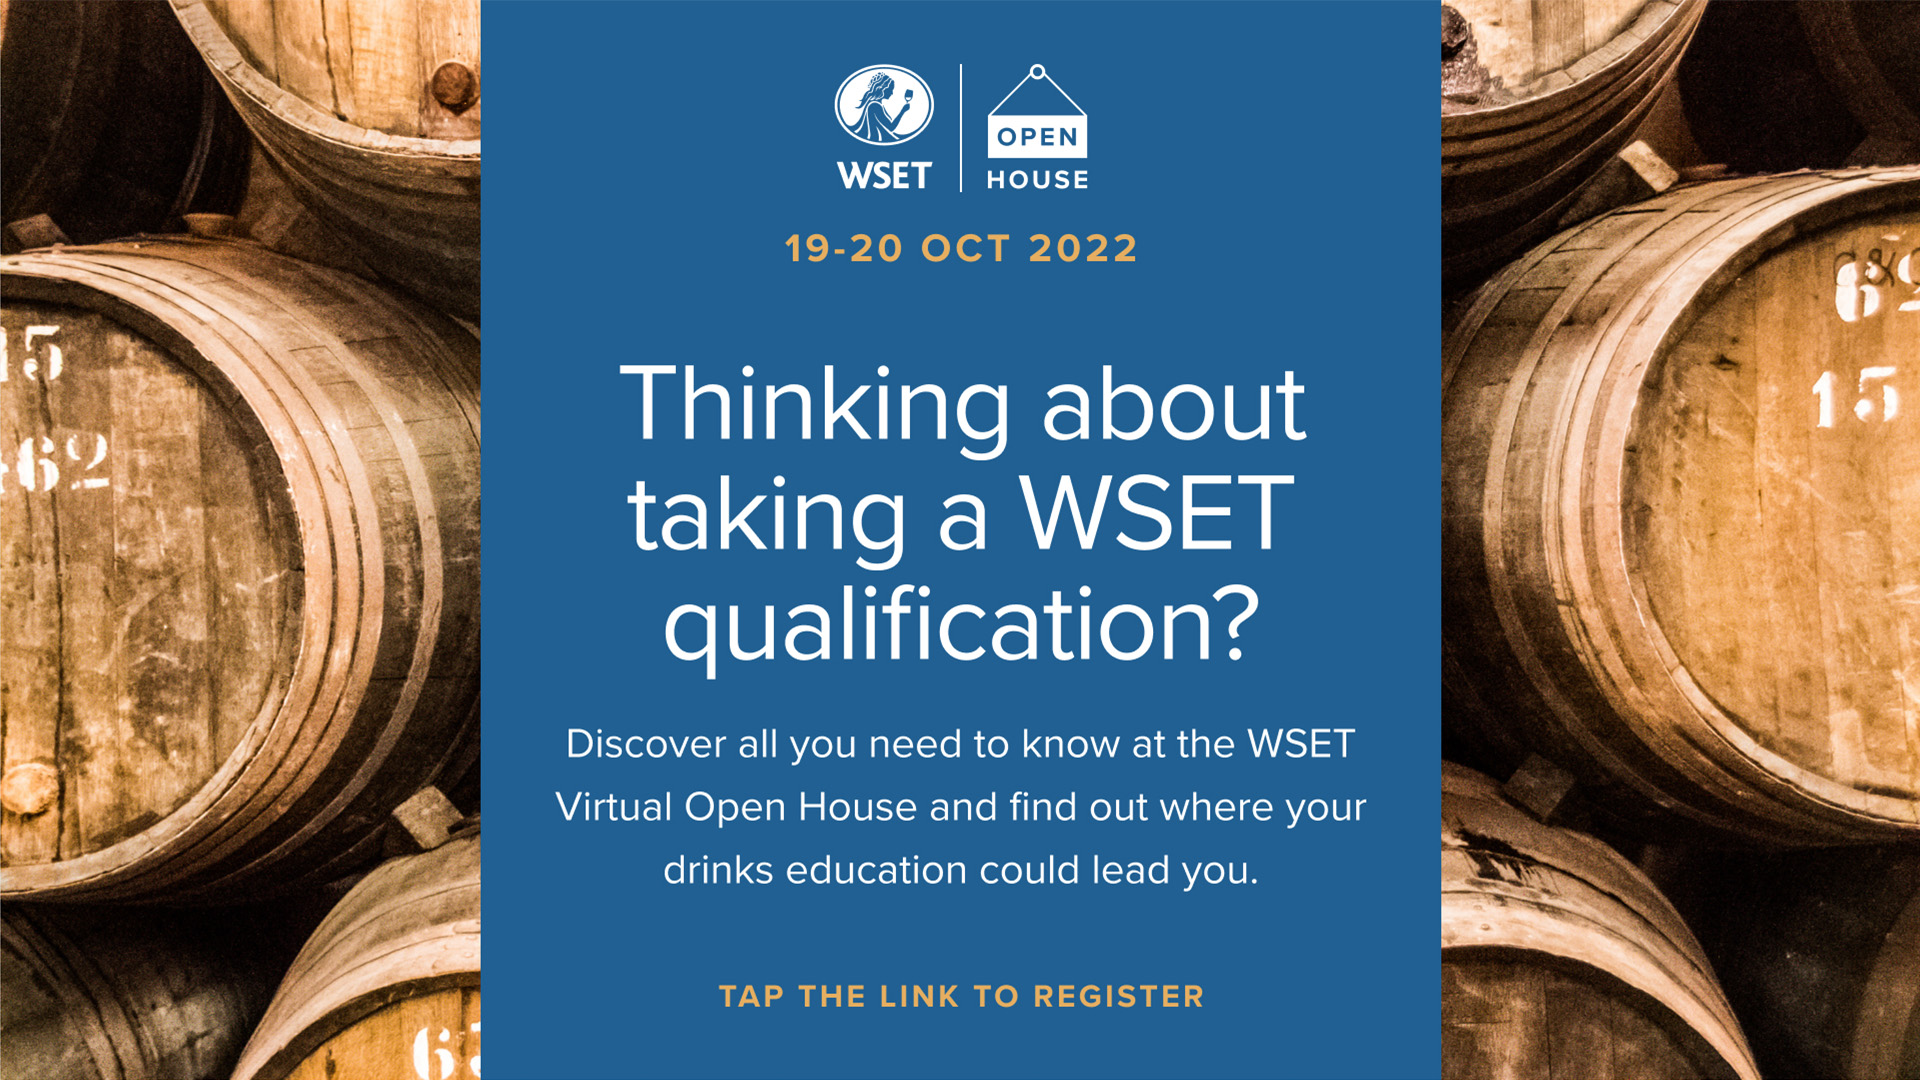 WSET announces first ‘virtual open house’